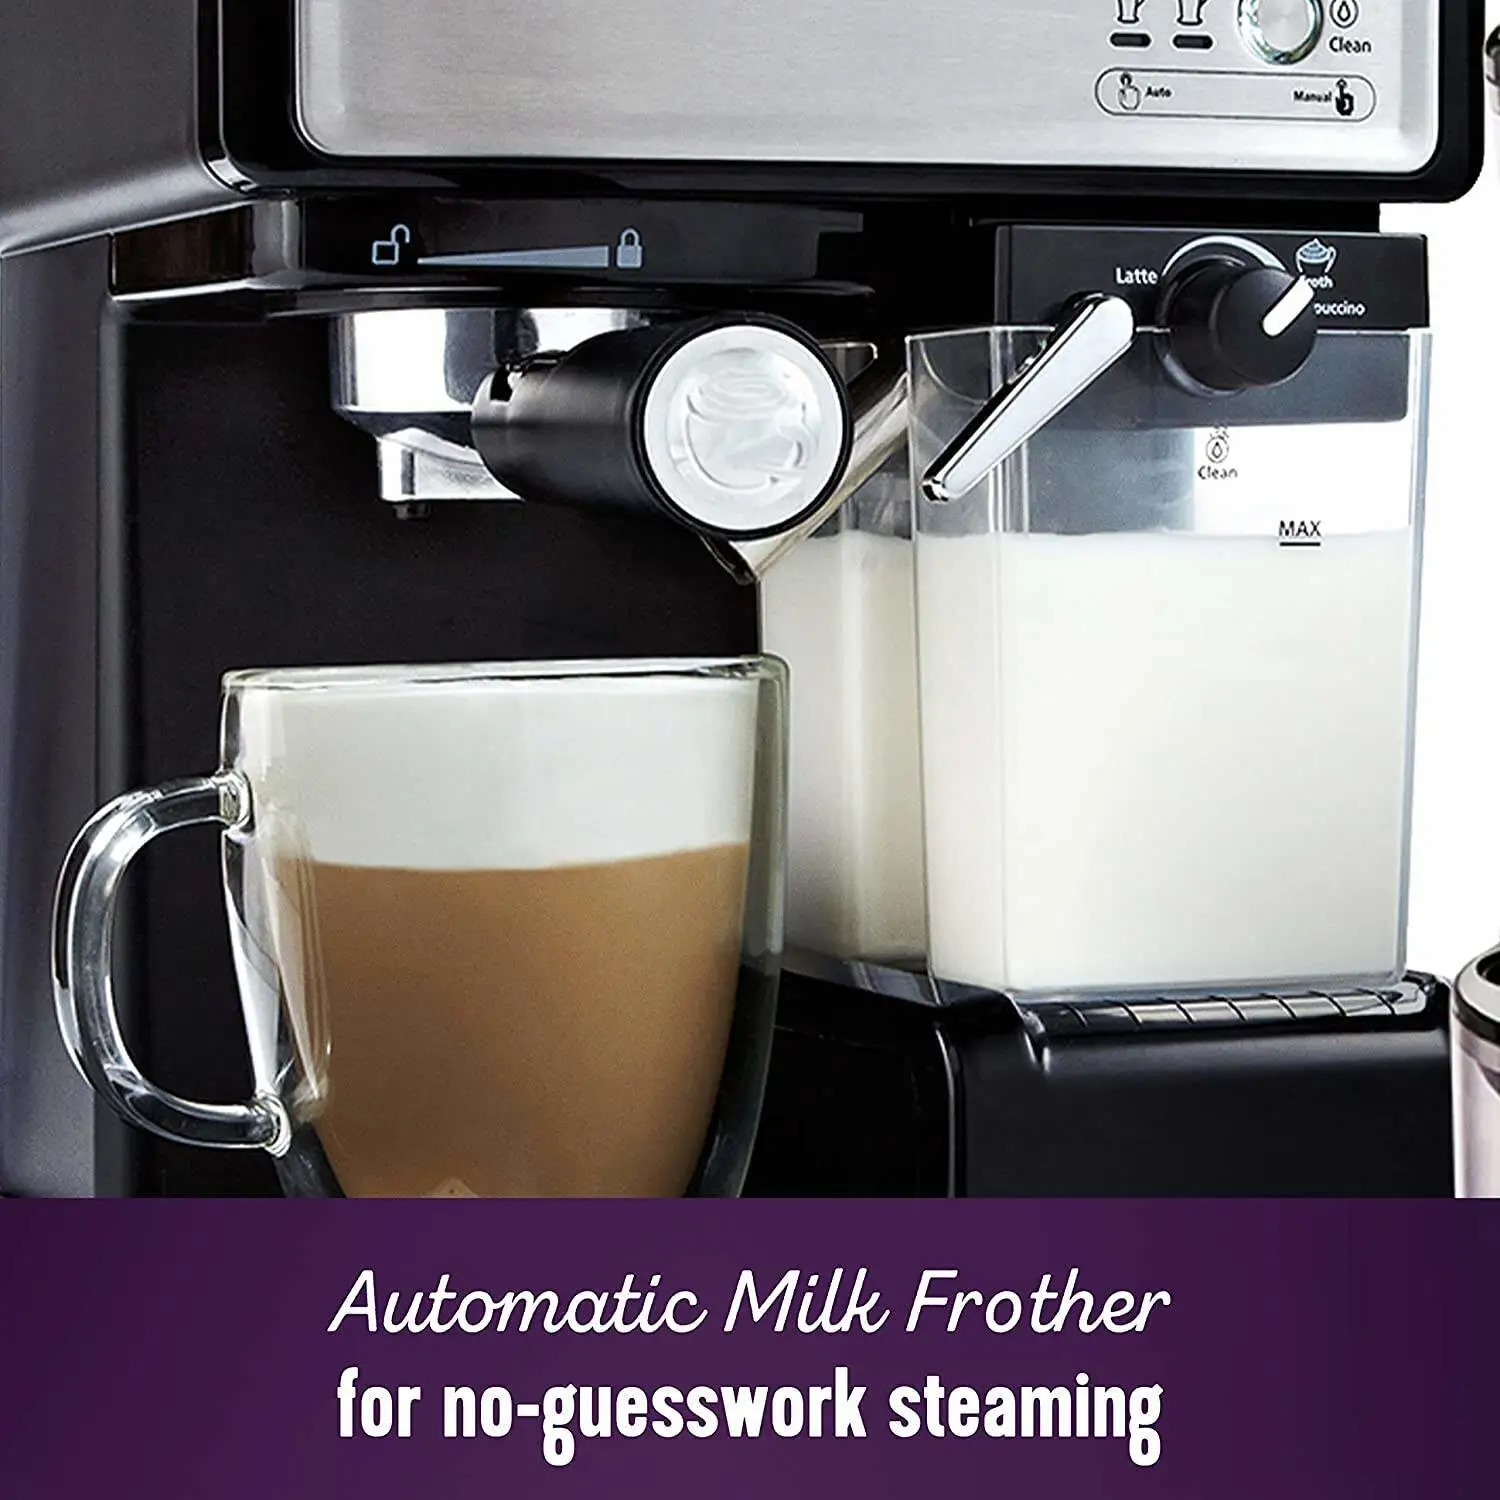 Espresso and Cappuccino Machine, Programmable Coffee Maker with Automatic Milk Frother and 15-Bar Pump, Stainless Steel